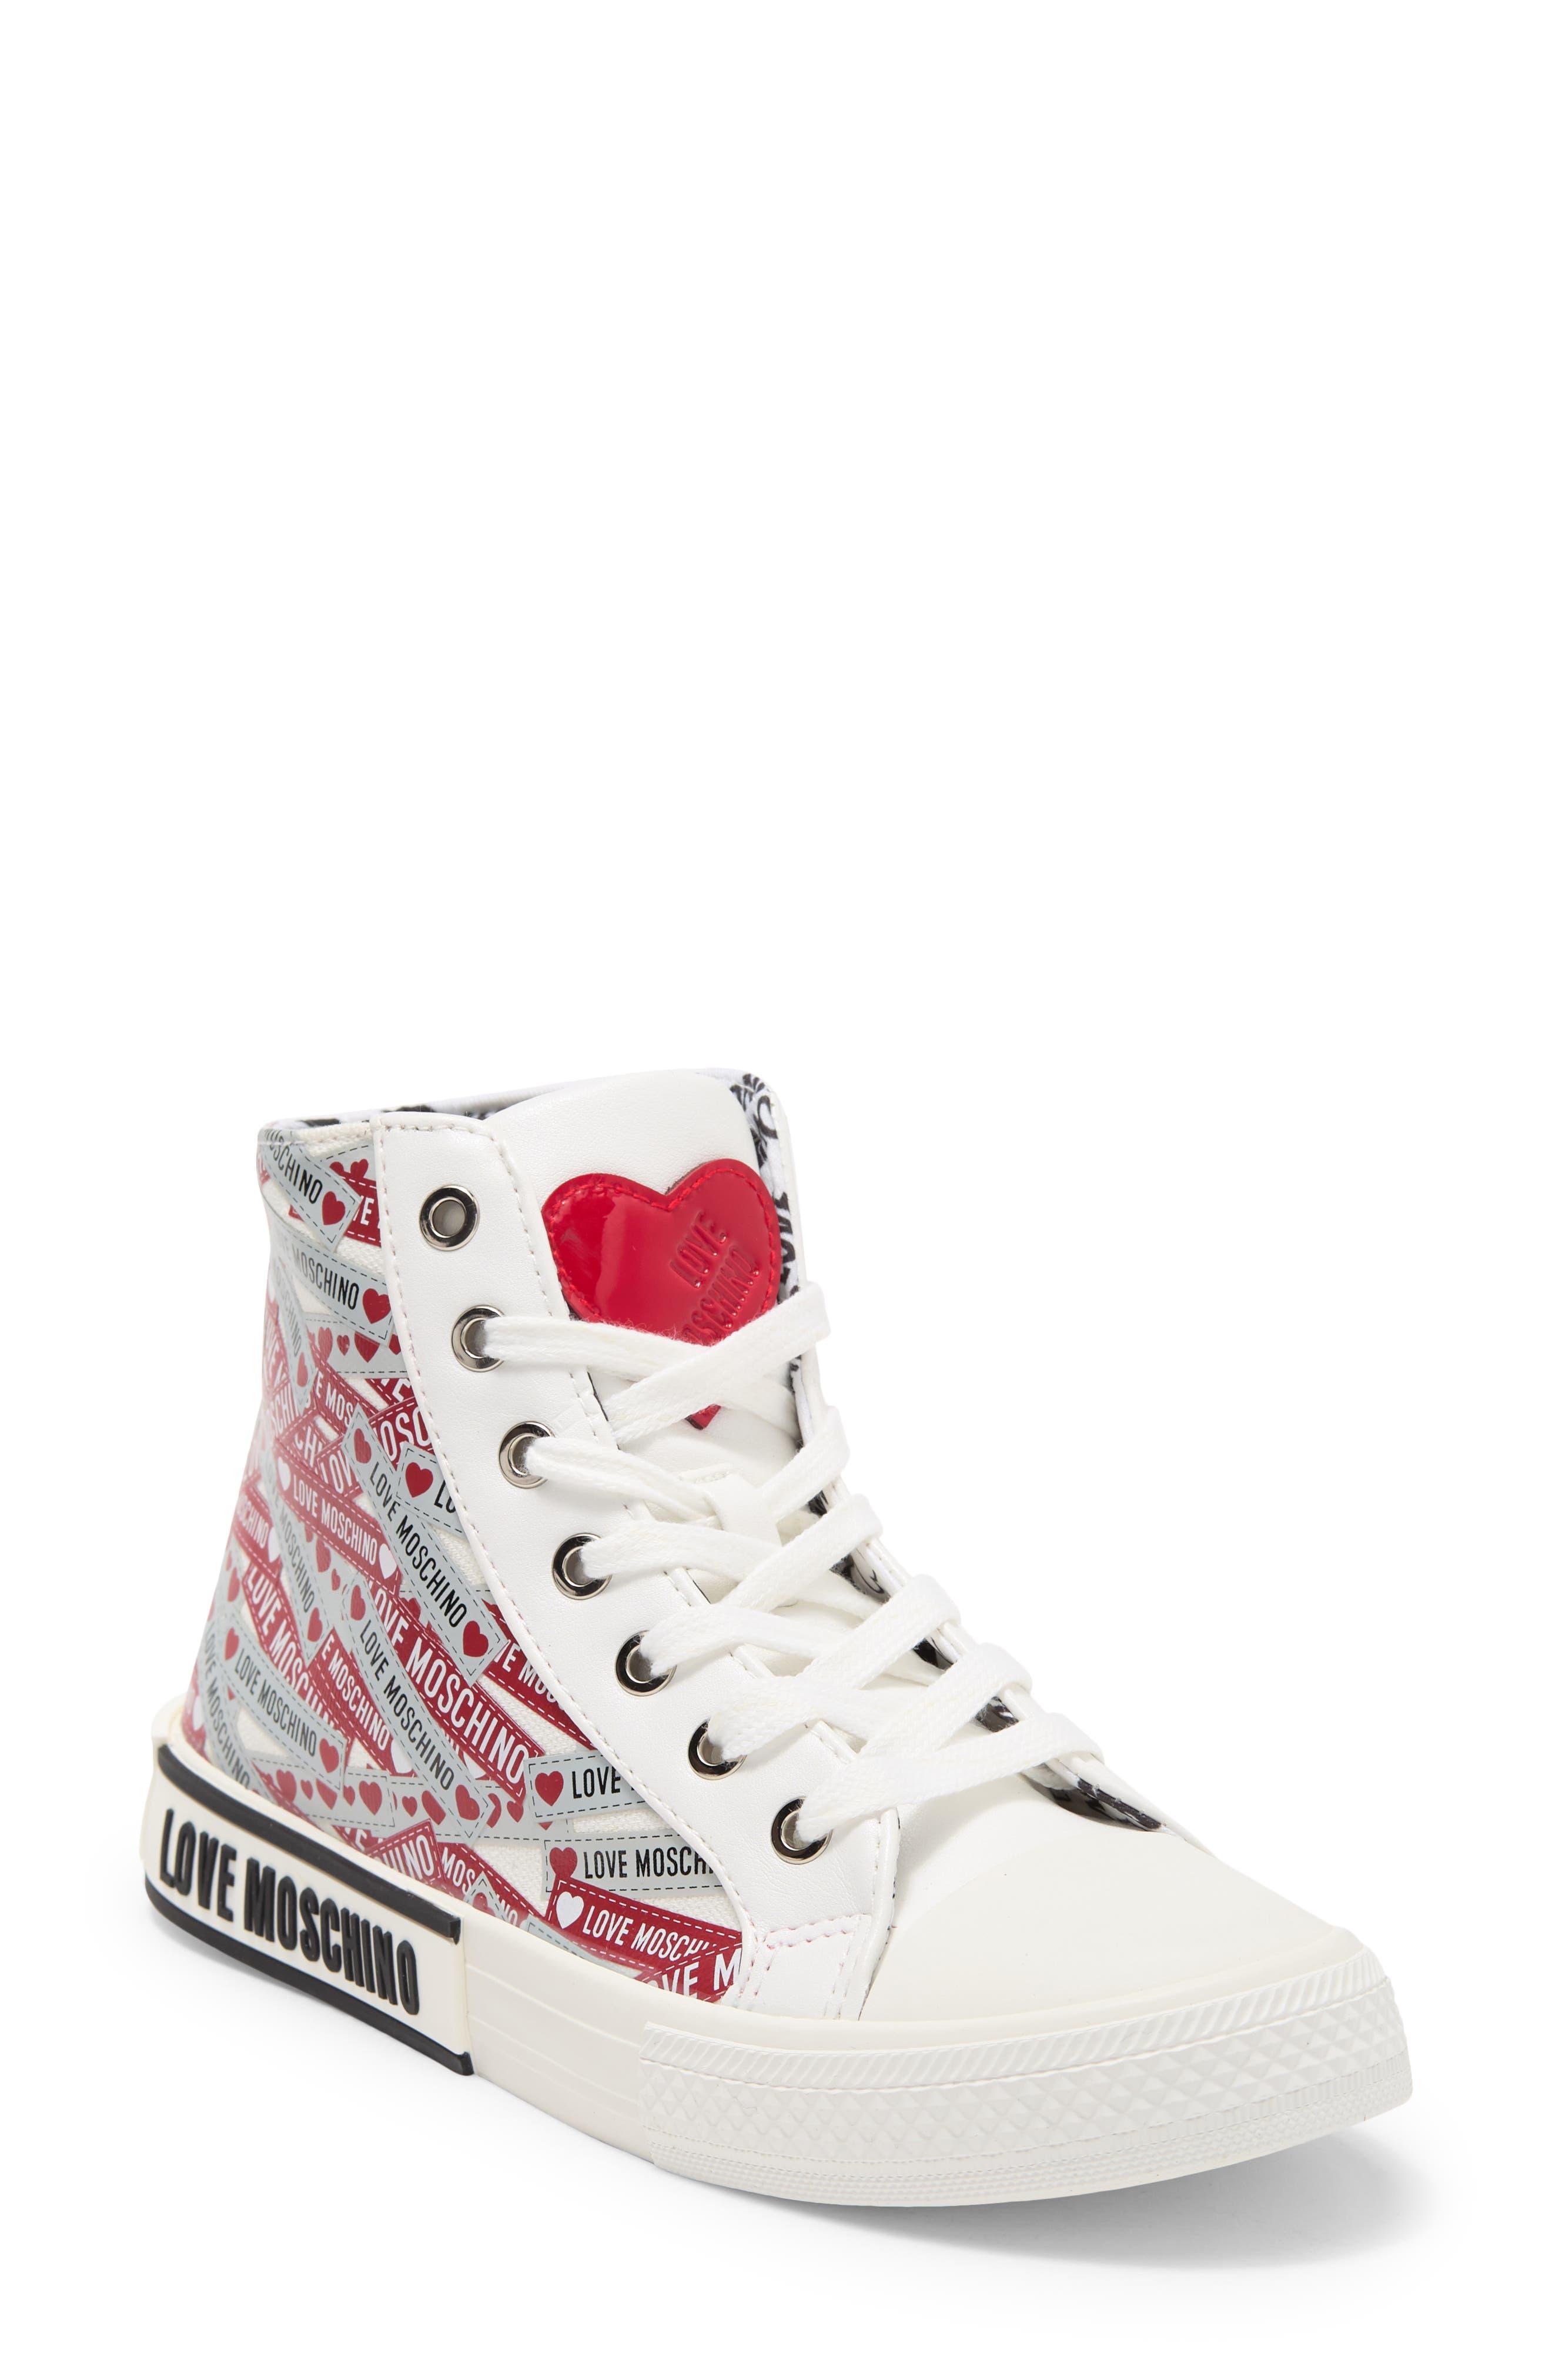 Love Moschino Canvas High Top Sneaker in White | Lyst